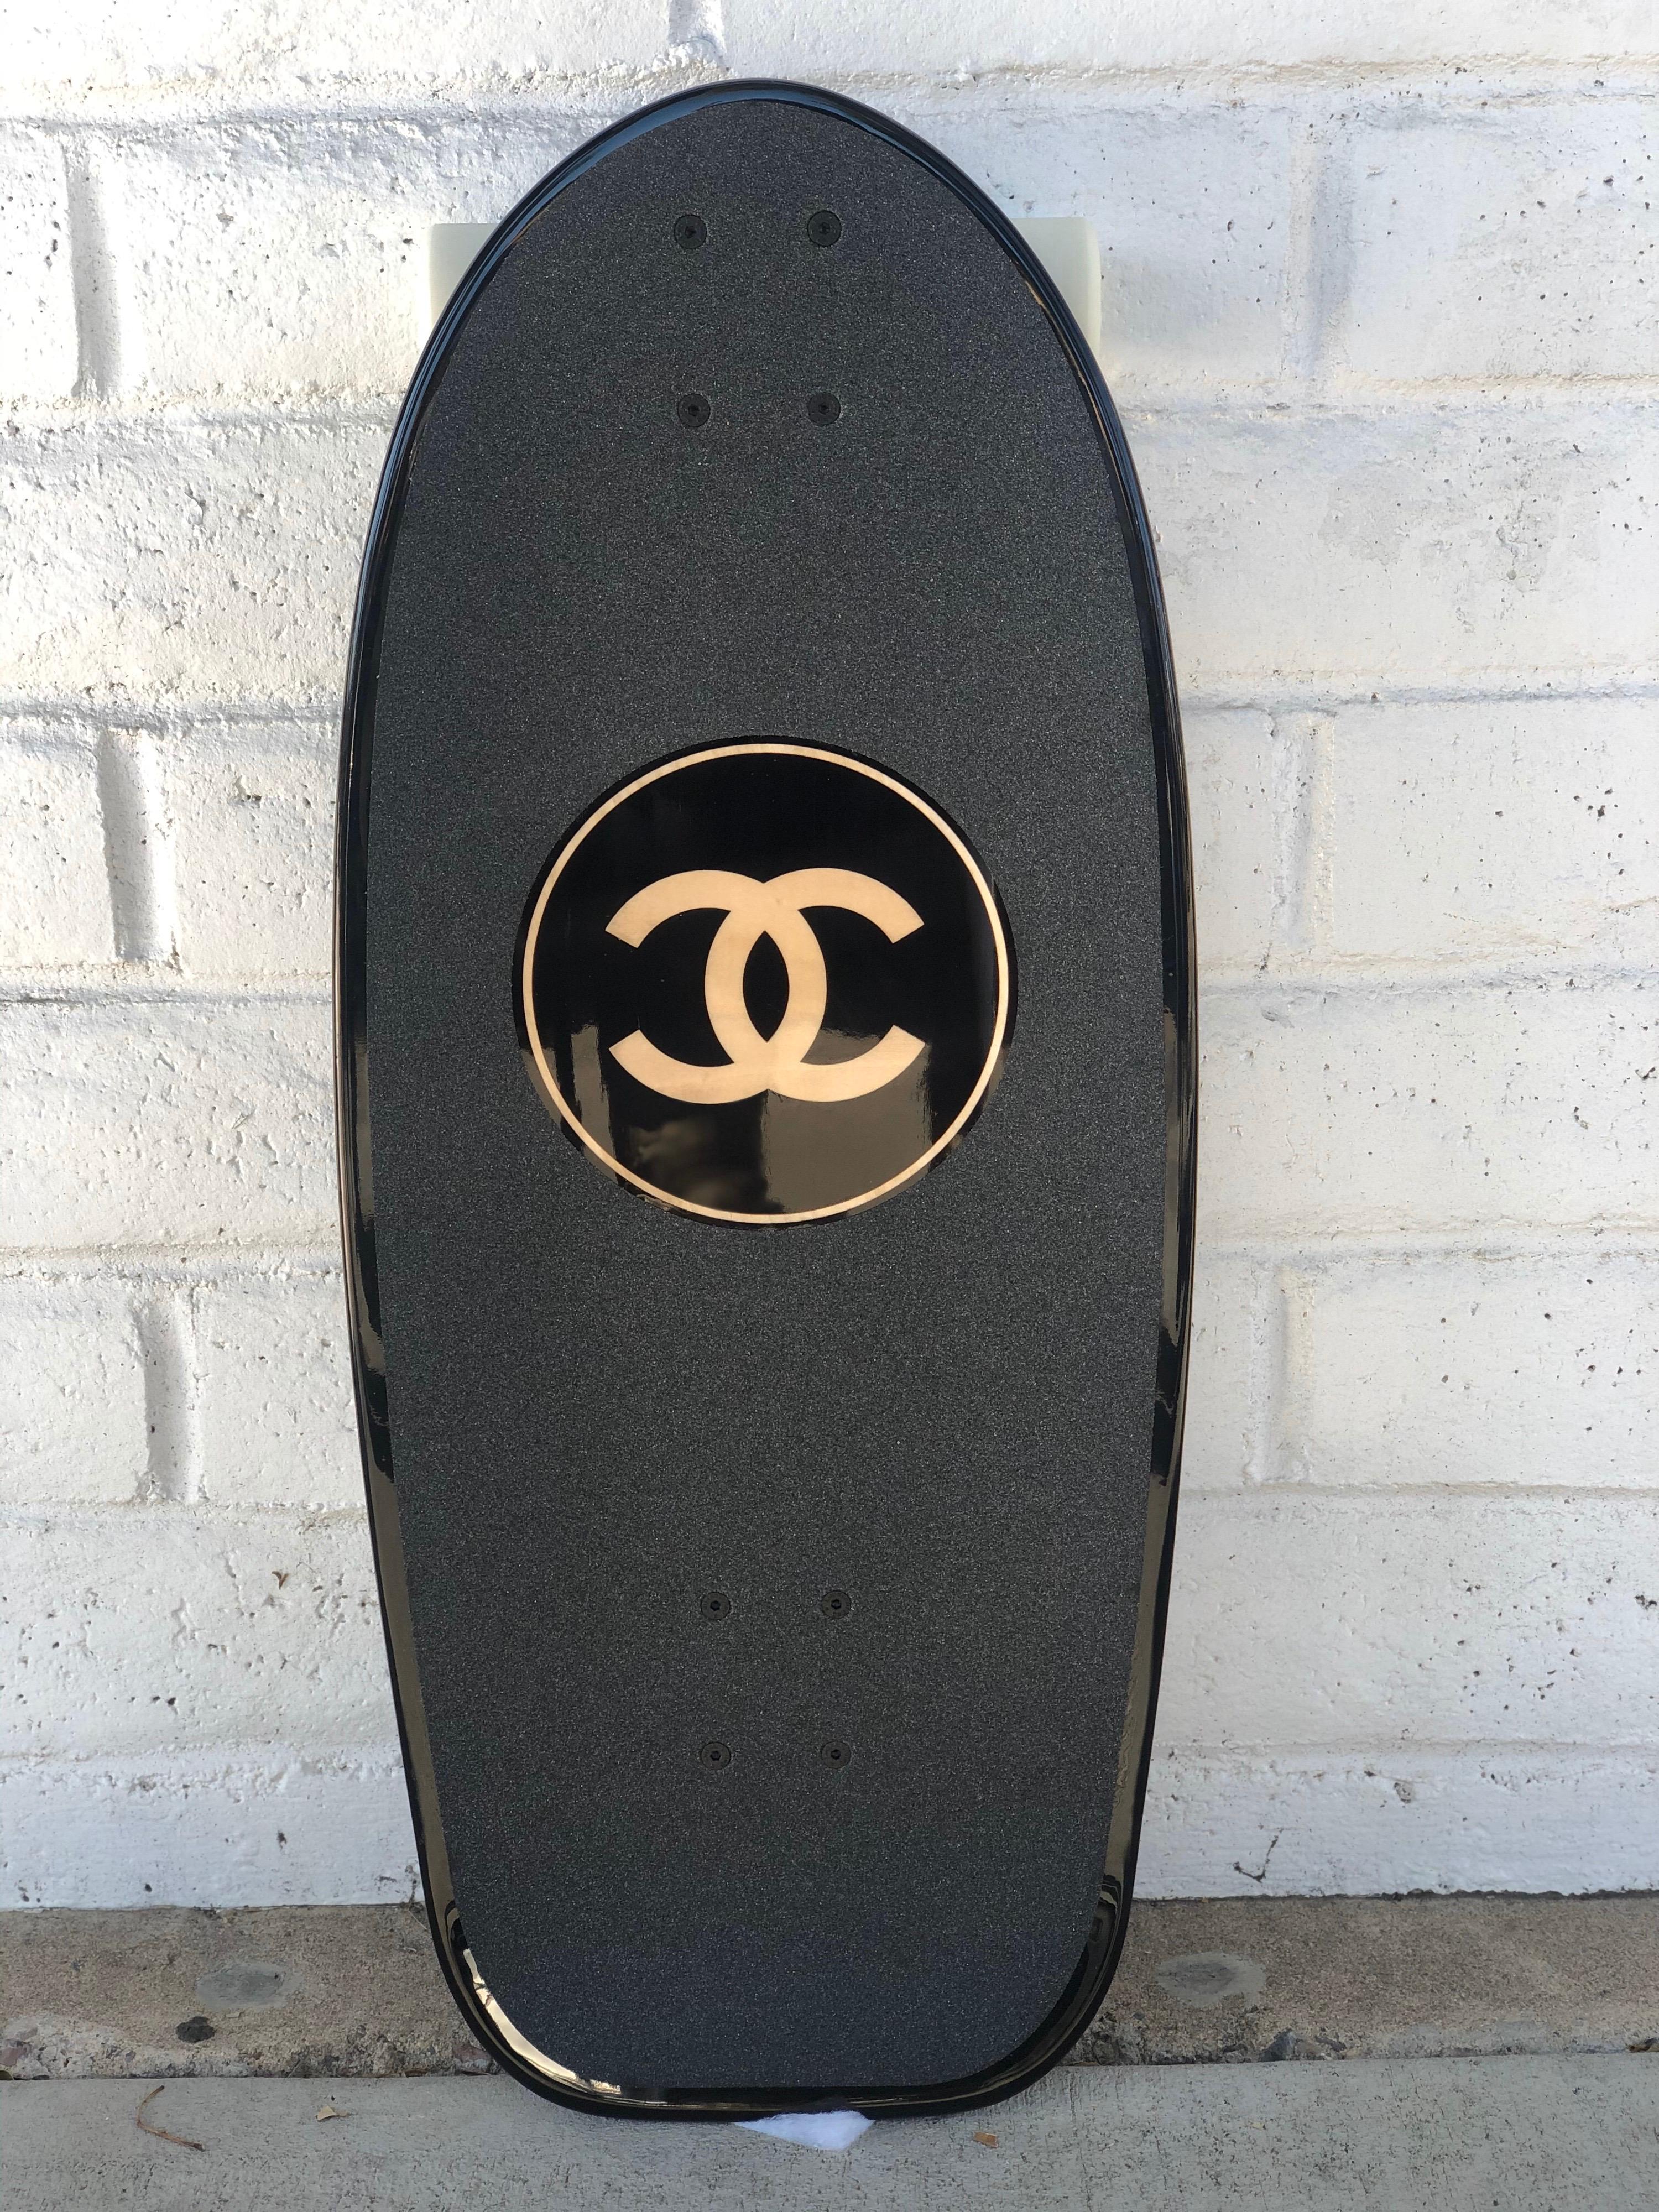 Elevate Your Ride or Decor game with Chanel’s Limited Edition Skateboard. A part of the French house’s SS19 collection, Chanel has released a luxe skateboard for those looking to add a touch of high fashion to their sport look or interior game.